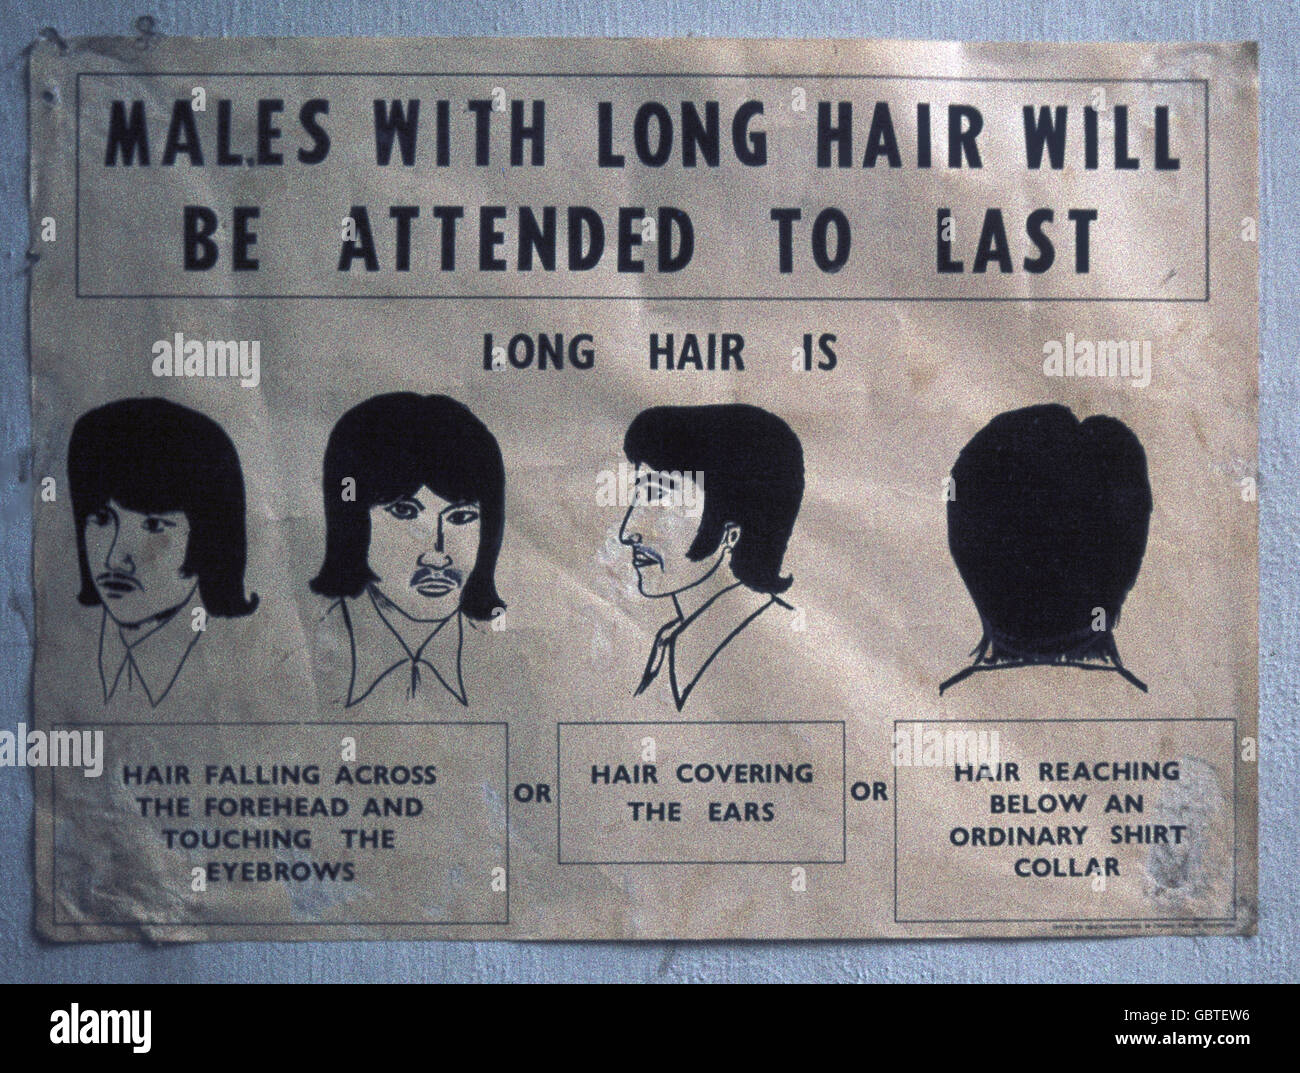 geography / travel, Singapore, politics, poster against men wearing long hair, 1976, Additional-Rights-Clearences-Not Available Stock Photo